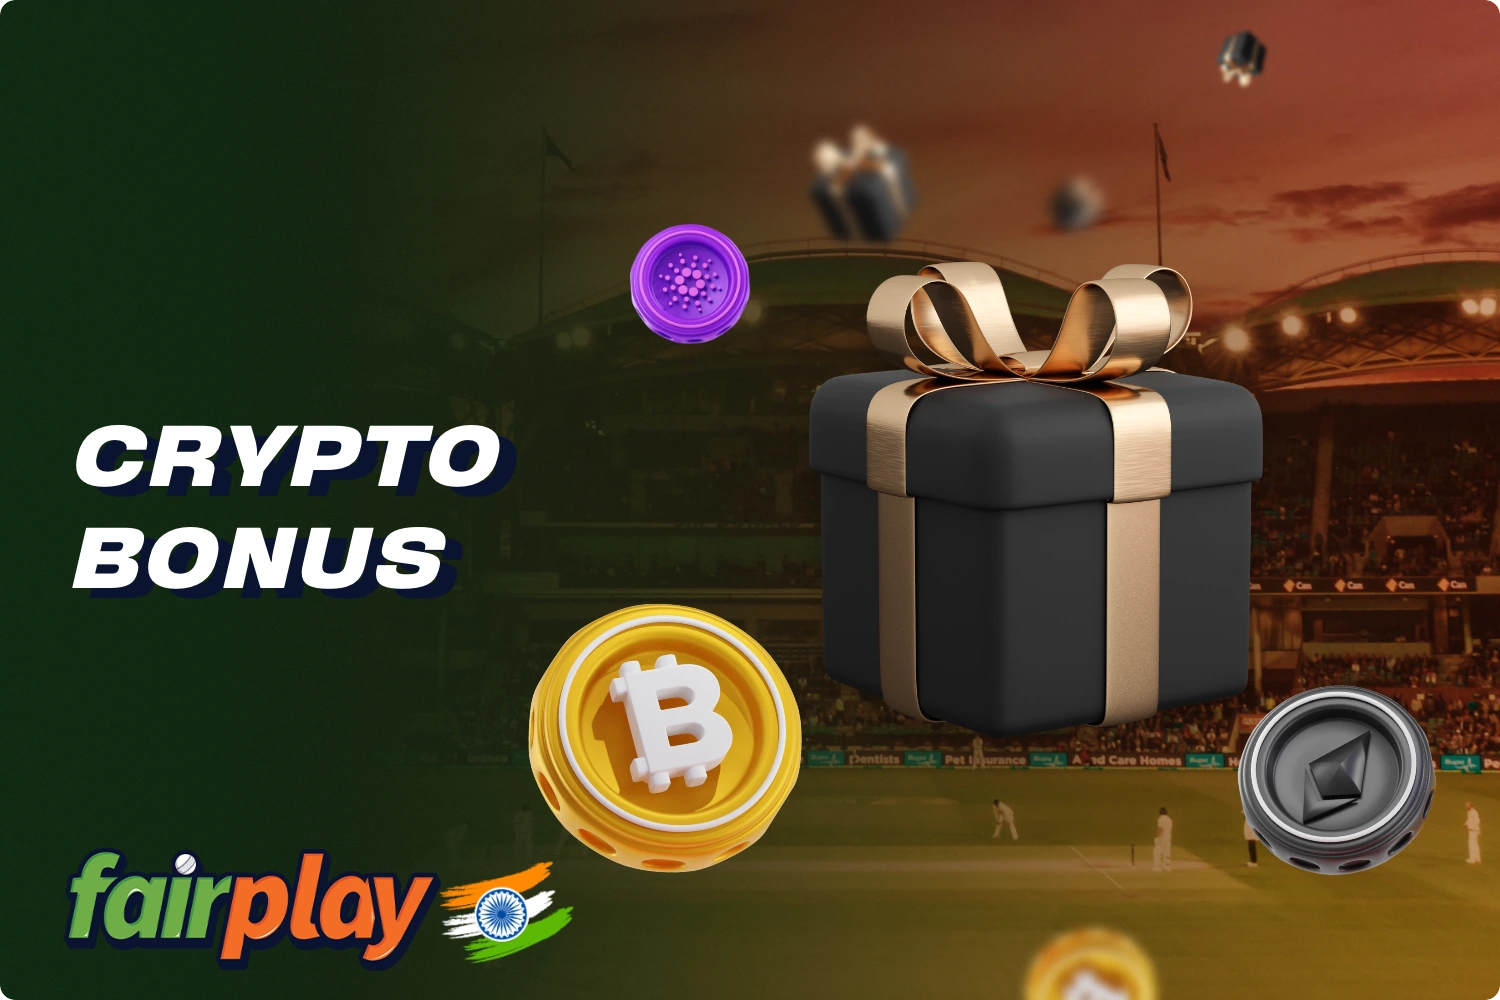 By depositing Fairplay using cryptocurrency users will receive a crypto bonus